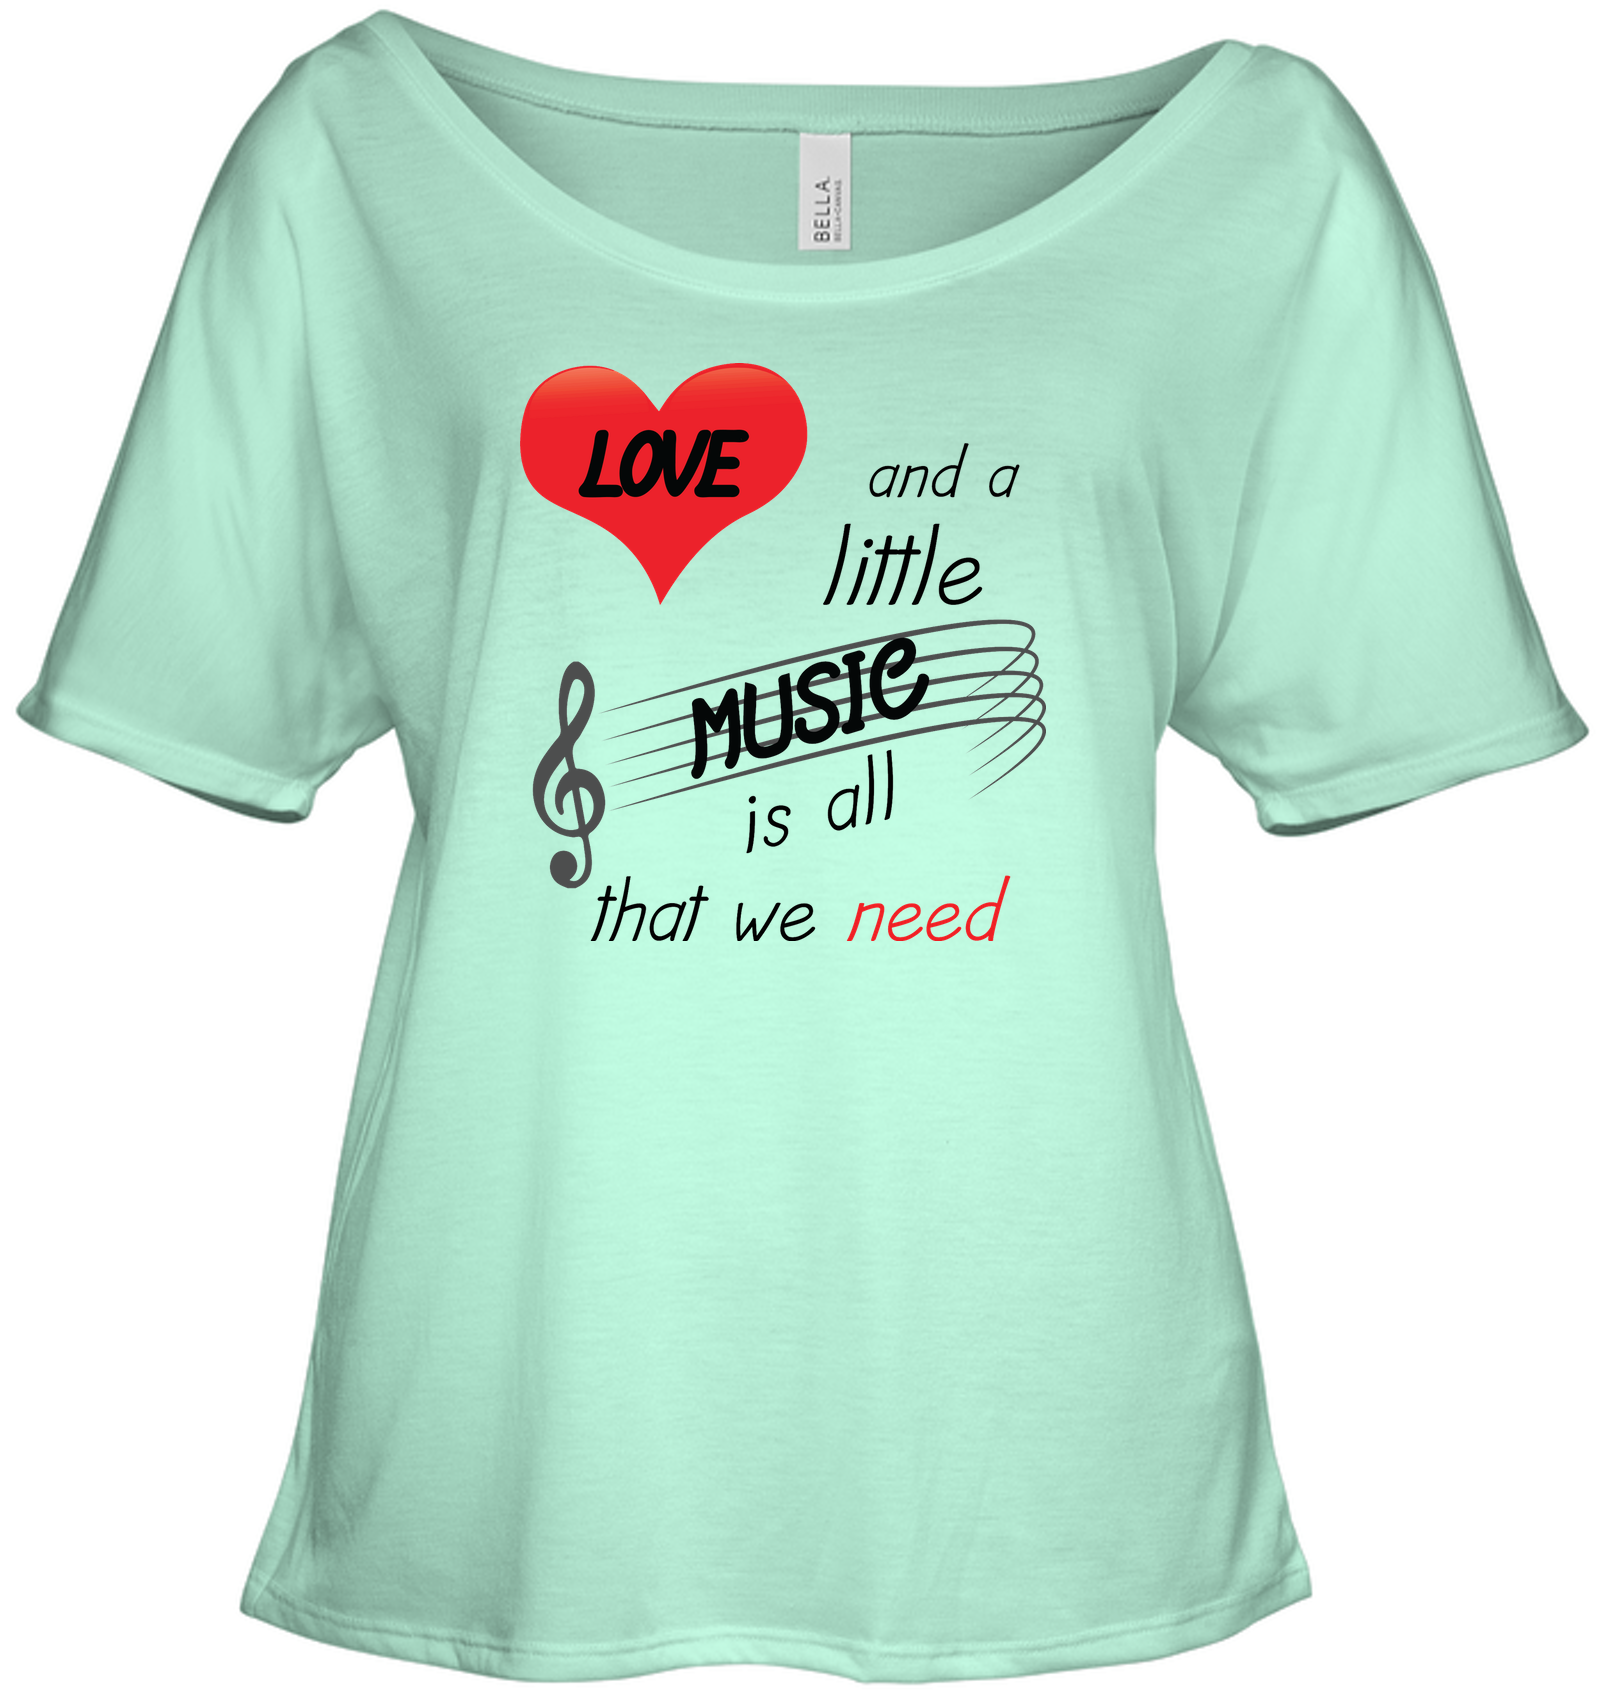 Love and a Little Music is all that we need - Bella + Canvas Women's Slouchy Tee